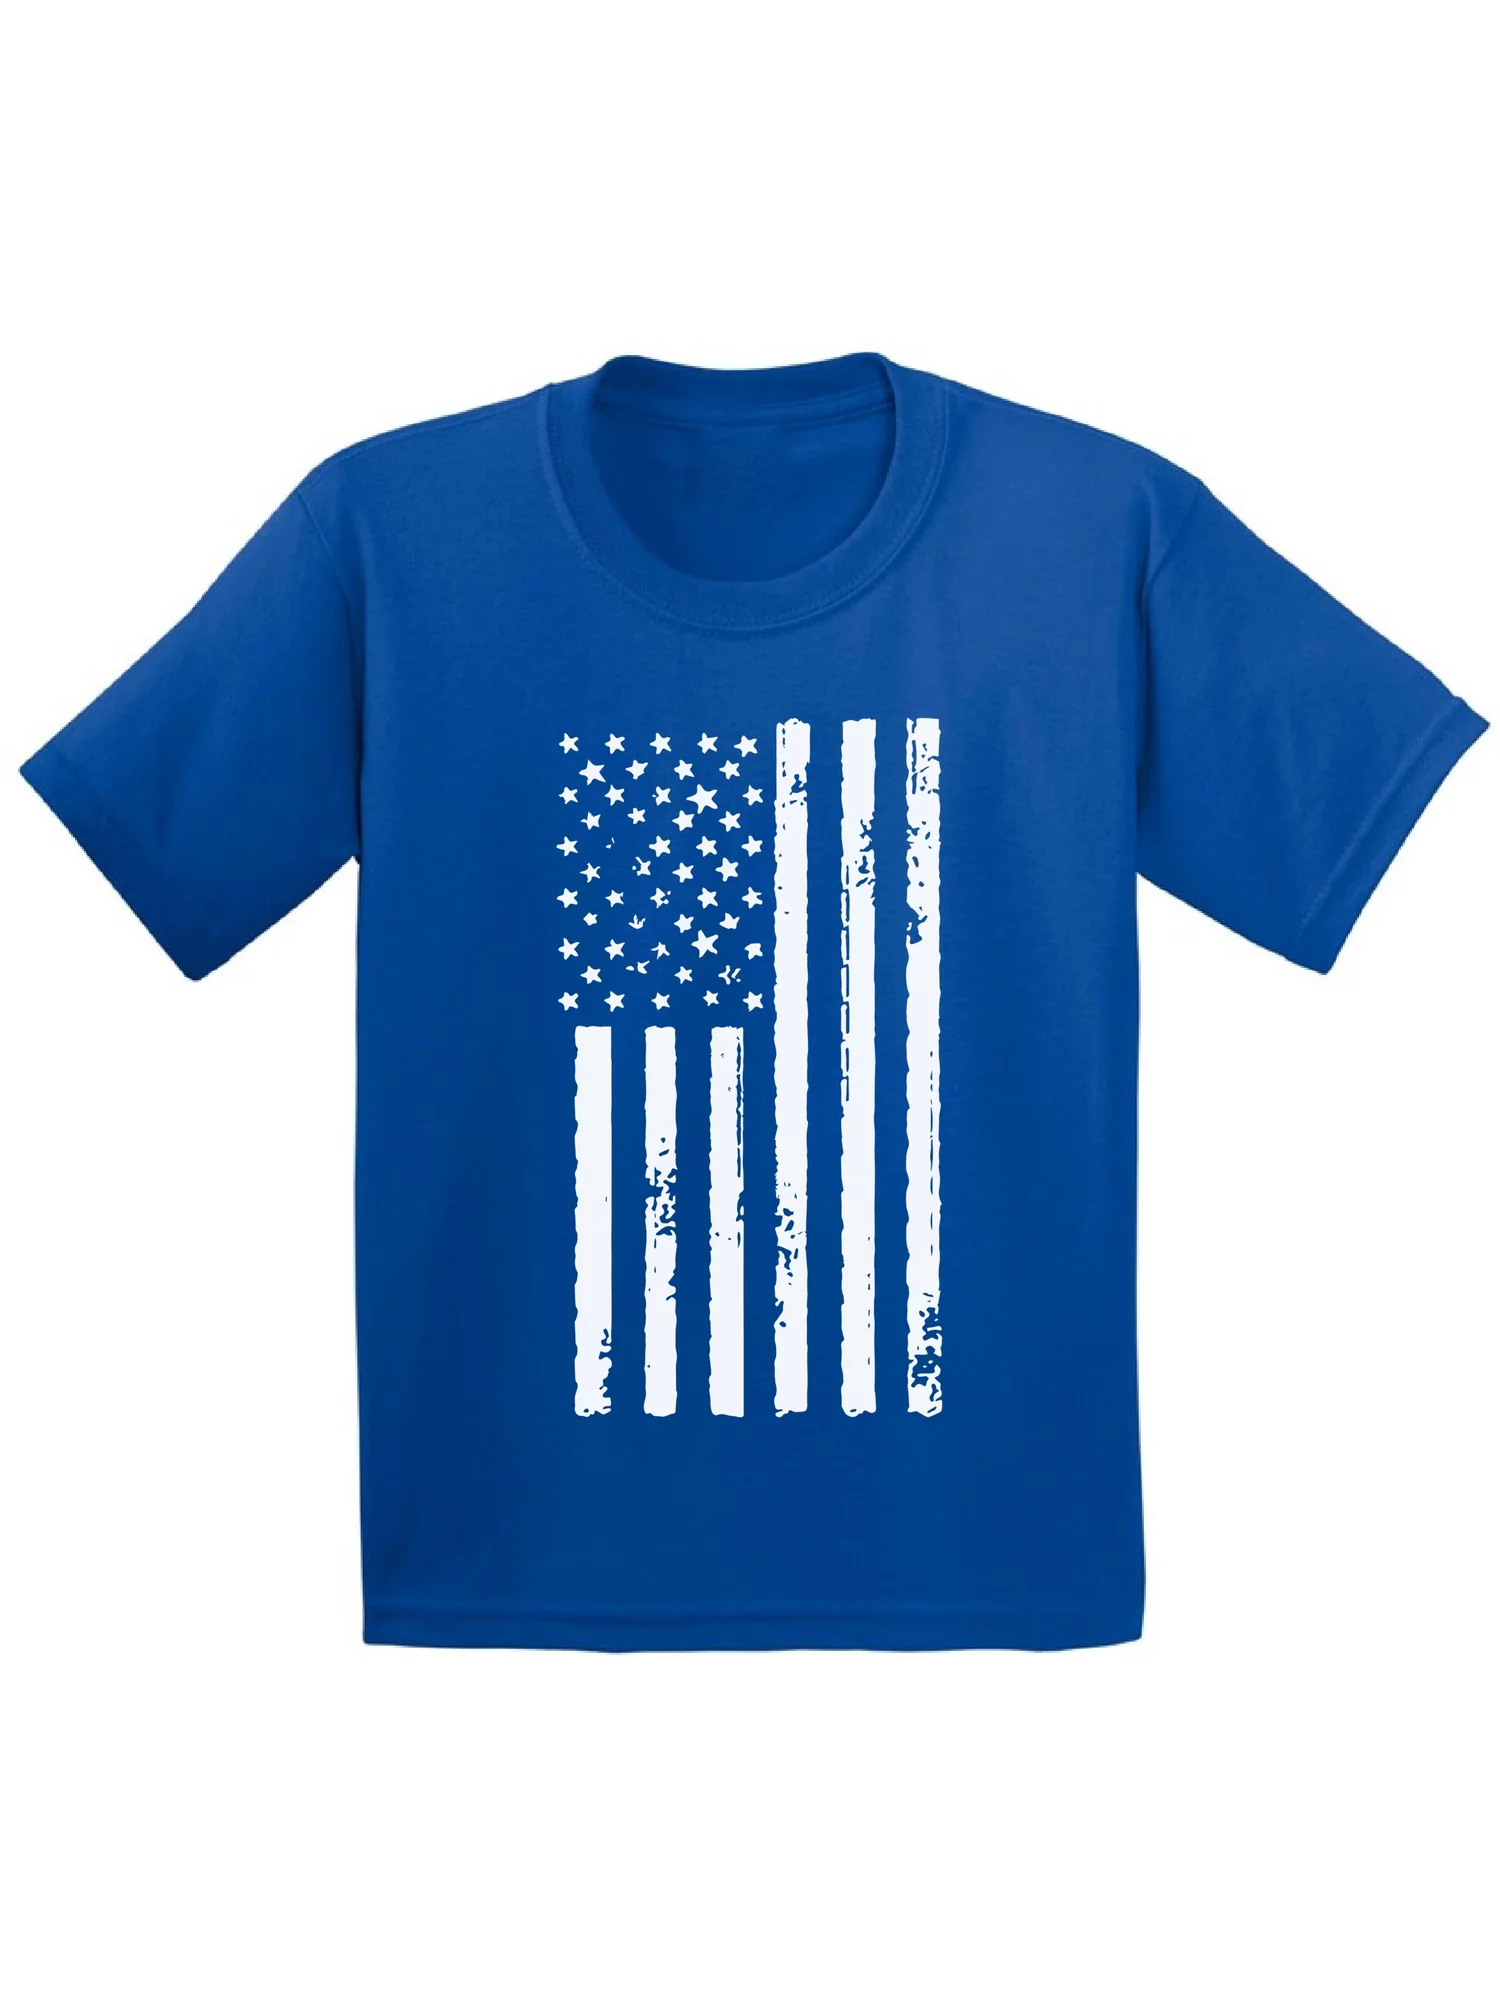 Awkward Styles Youth USA Flag Patriotic Graphic Youth Kids T-shirt Tops White Independence Day 4th of July